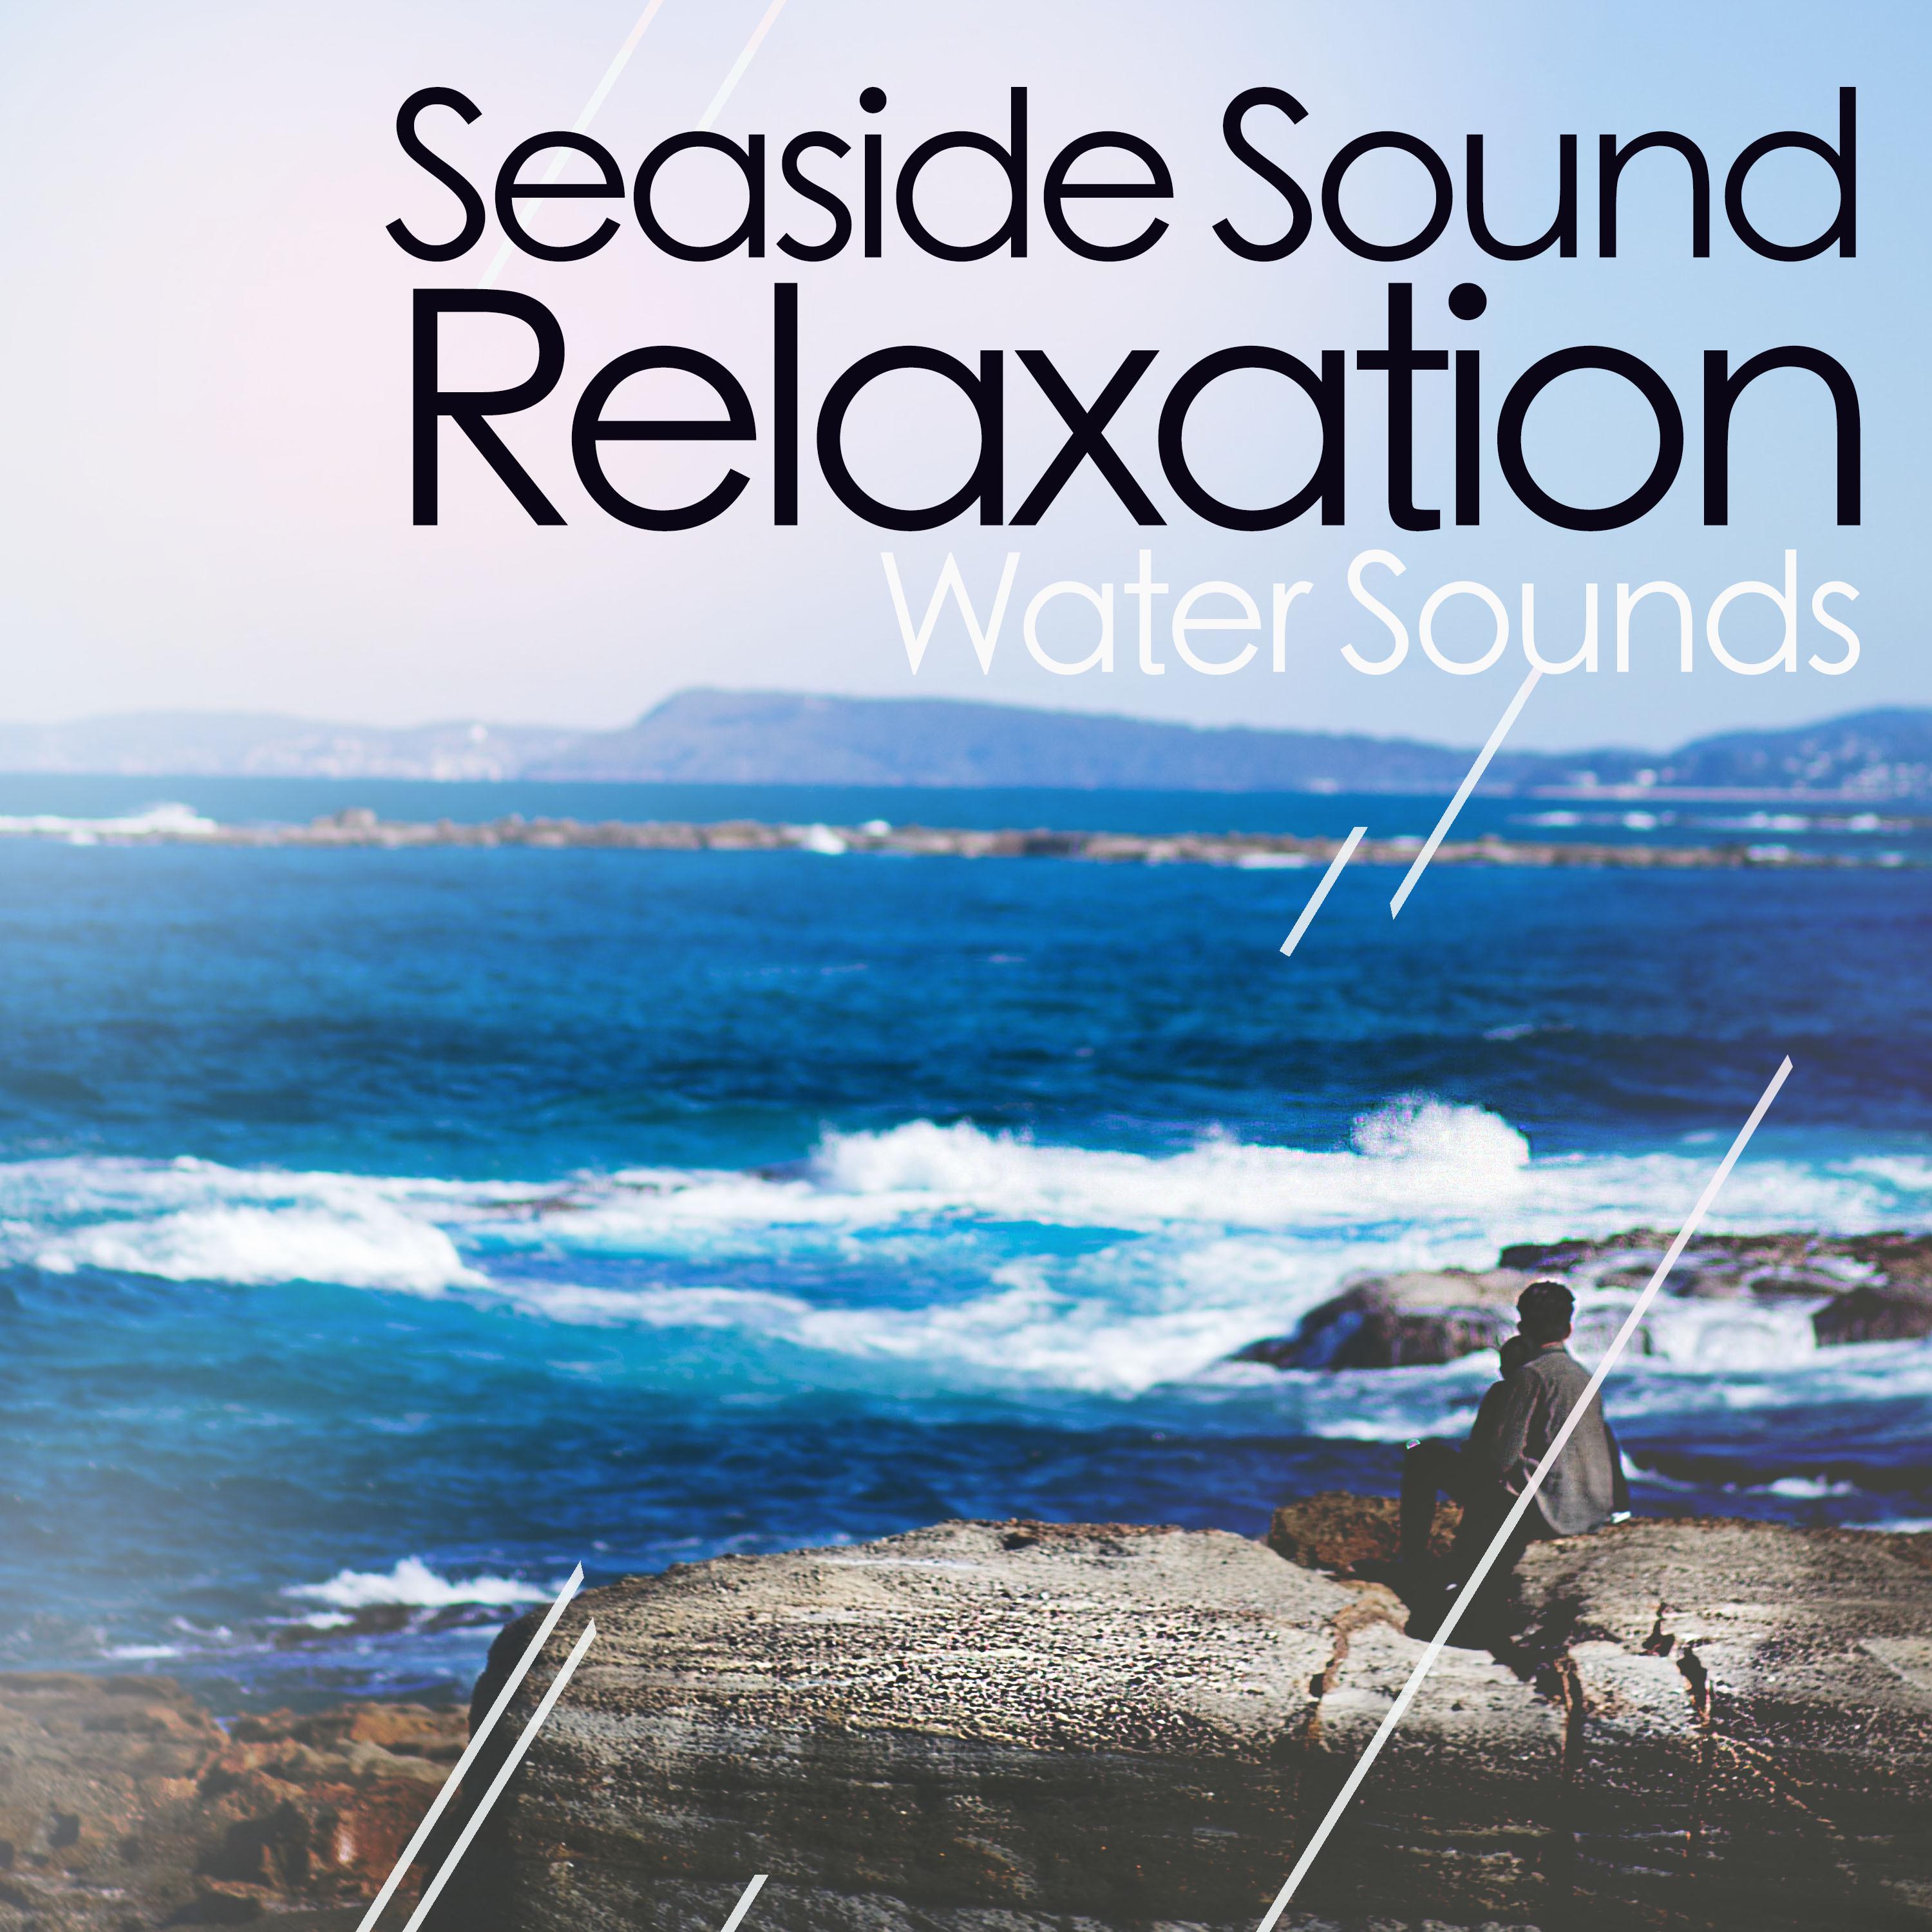 Seaside Sound Relaxation